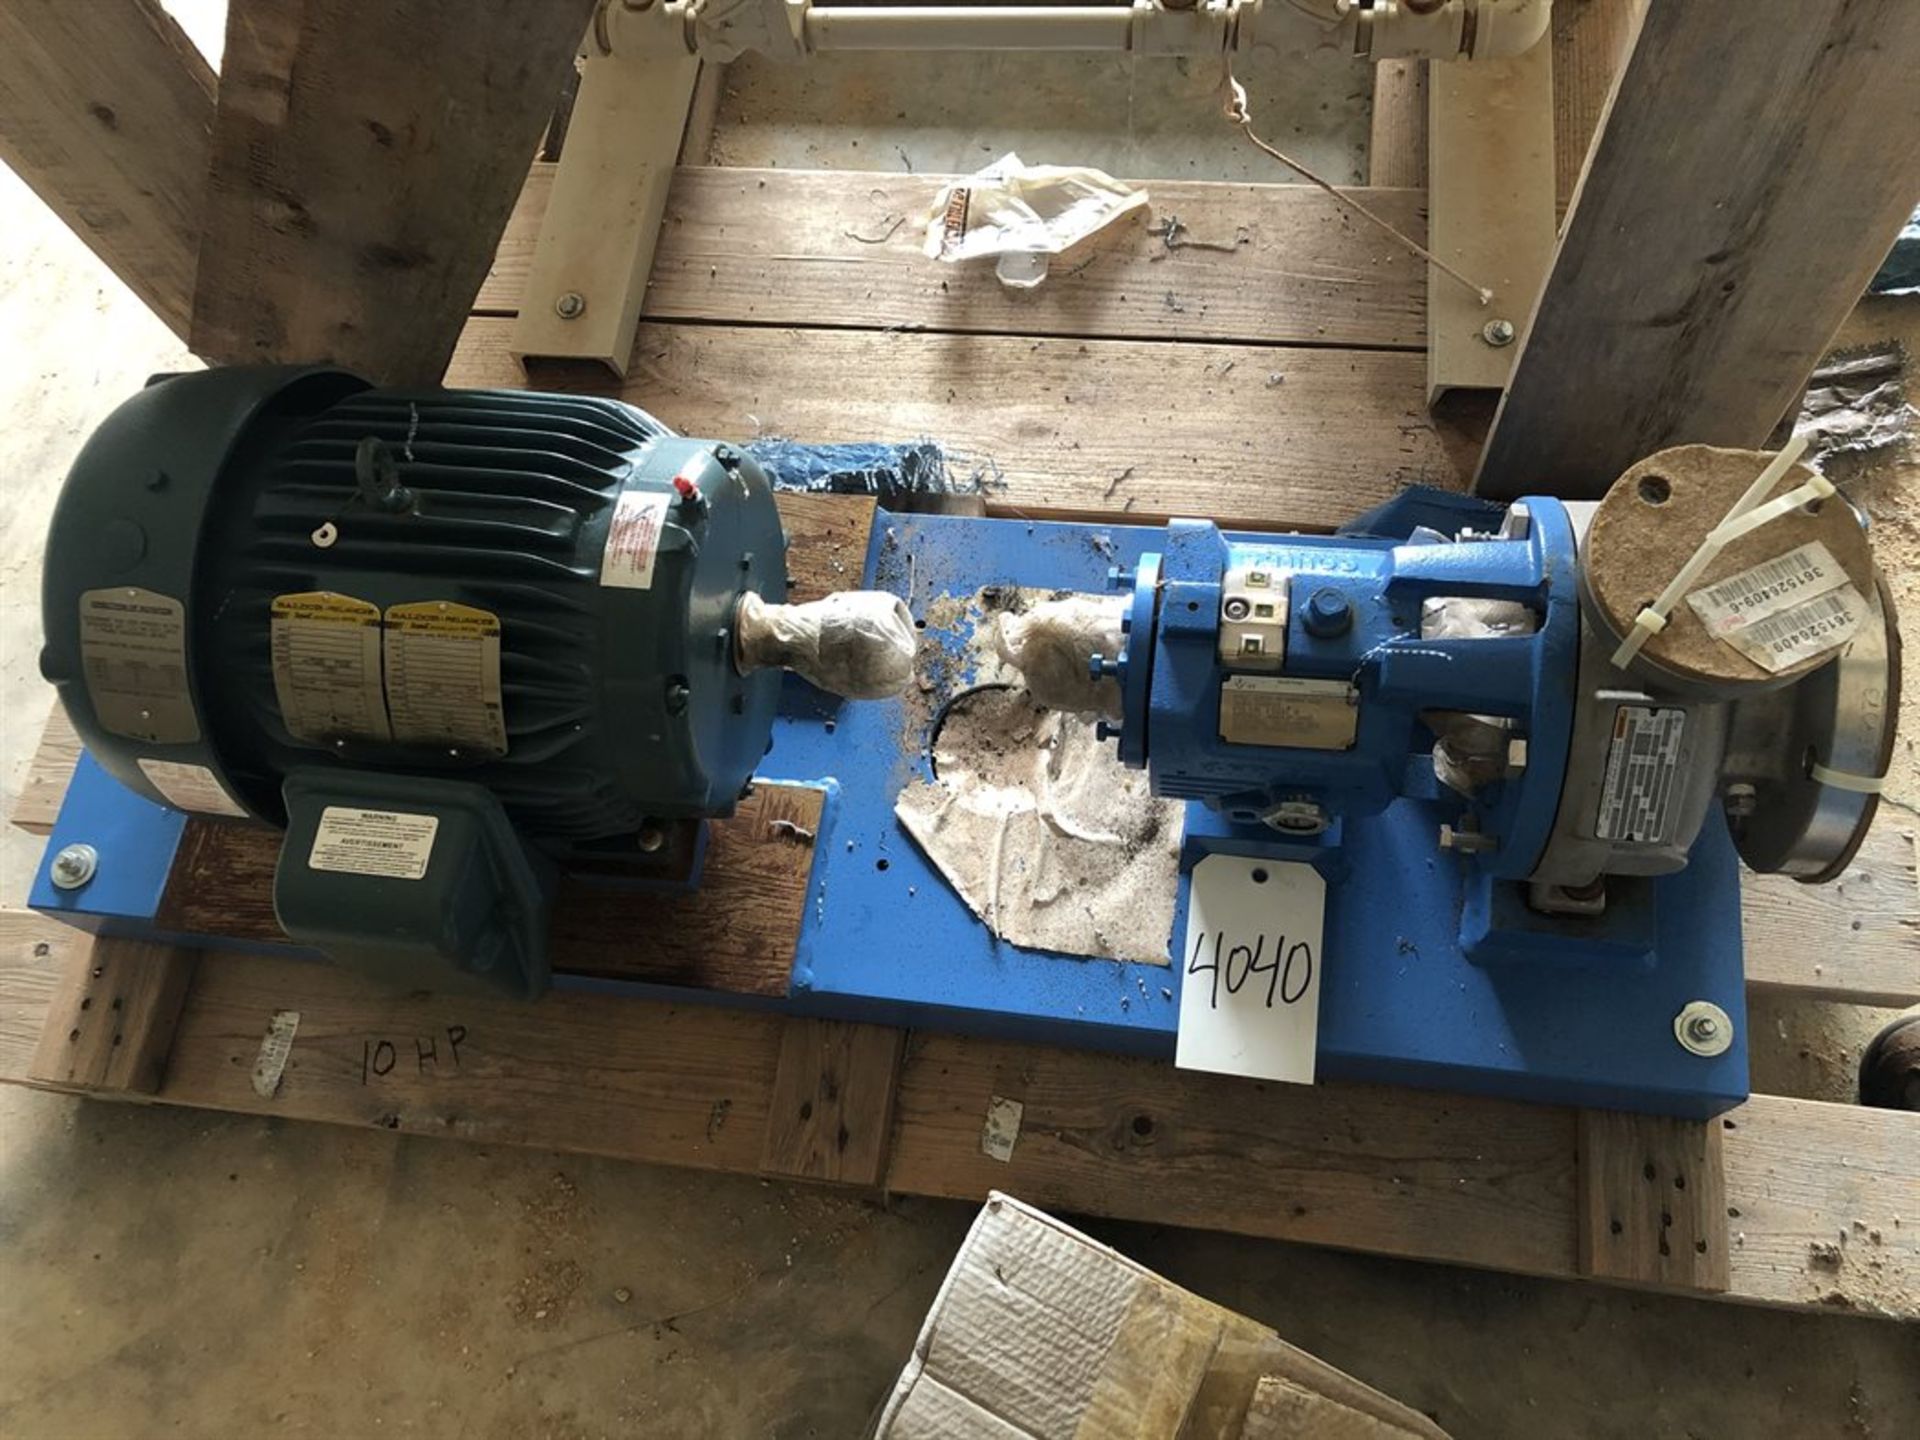 BALDOR 10 HP Electric Motor, w/ GOULDS Water Pump (Location: County Road)